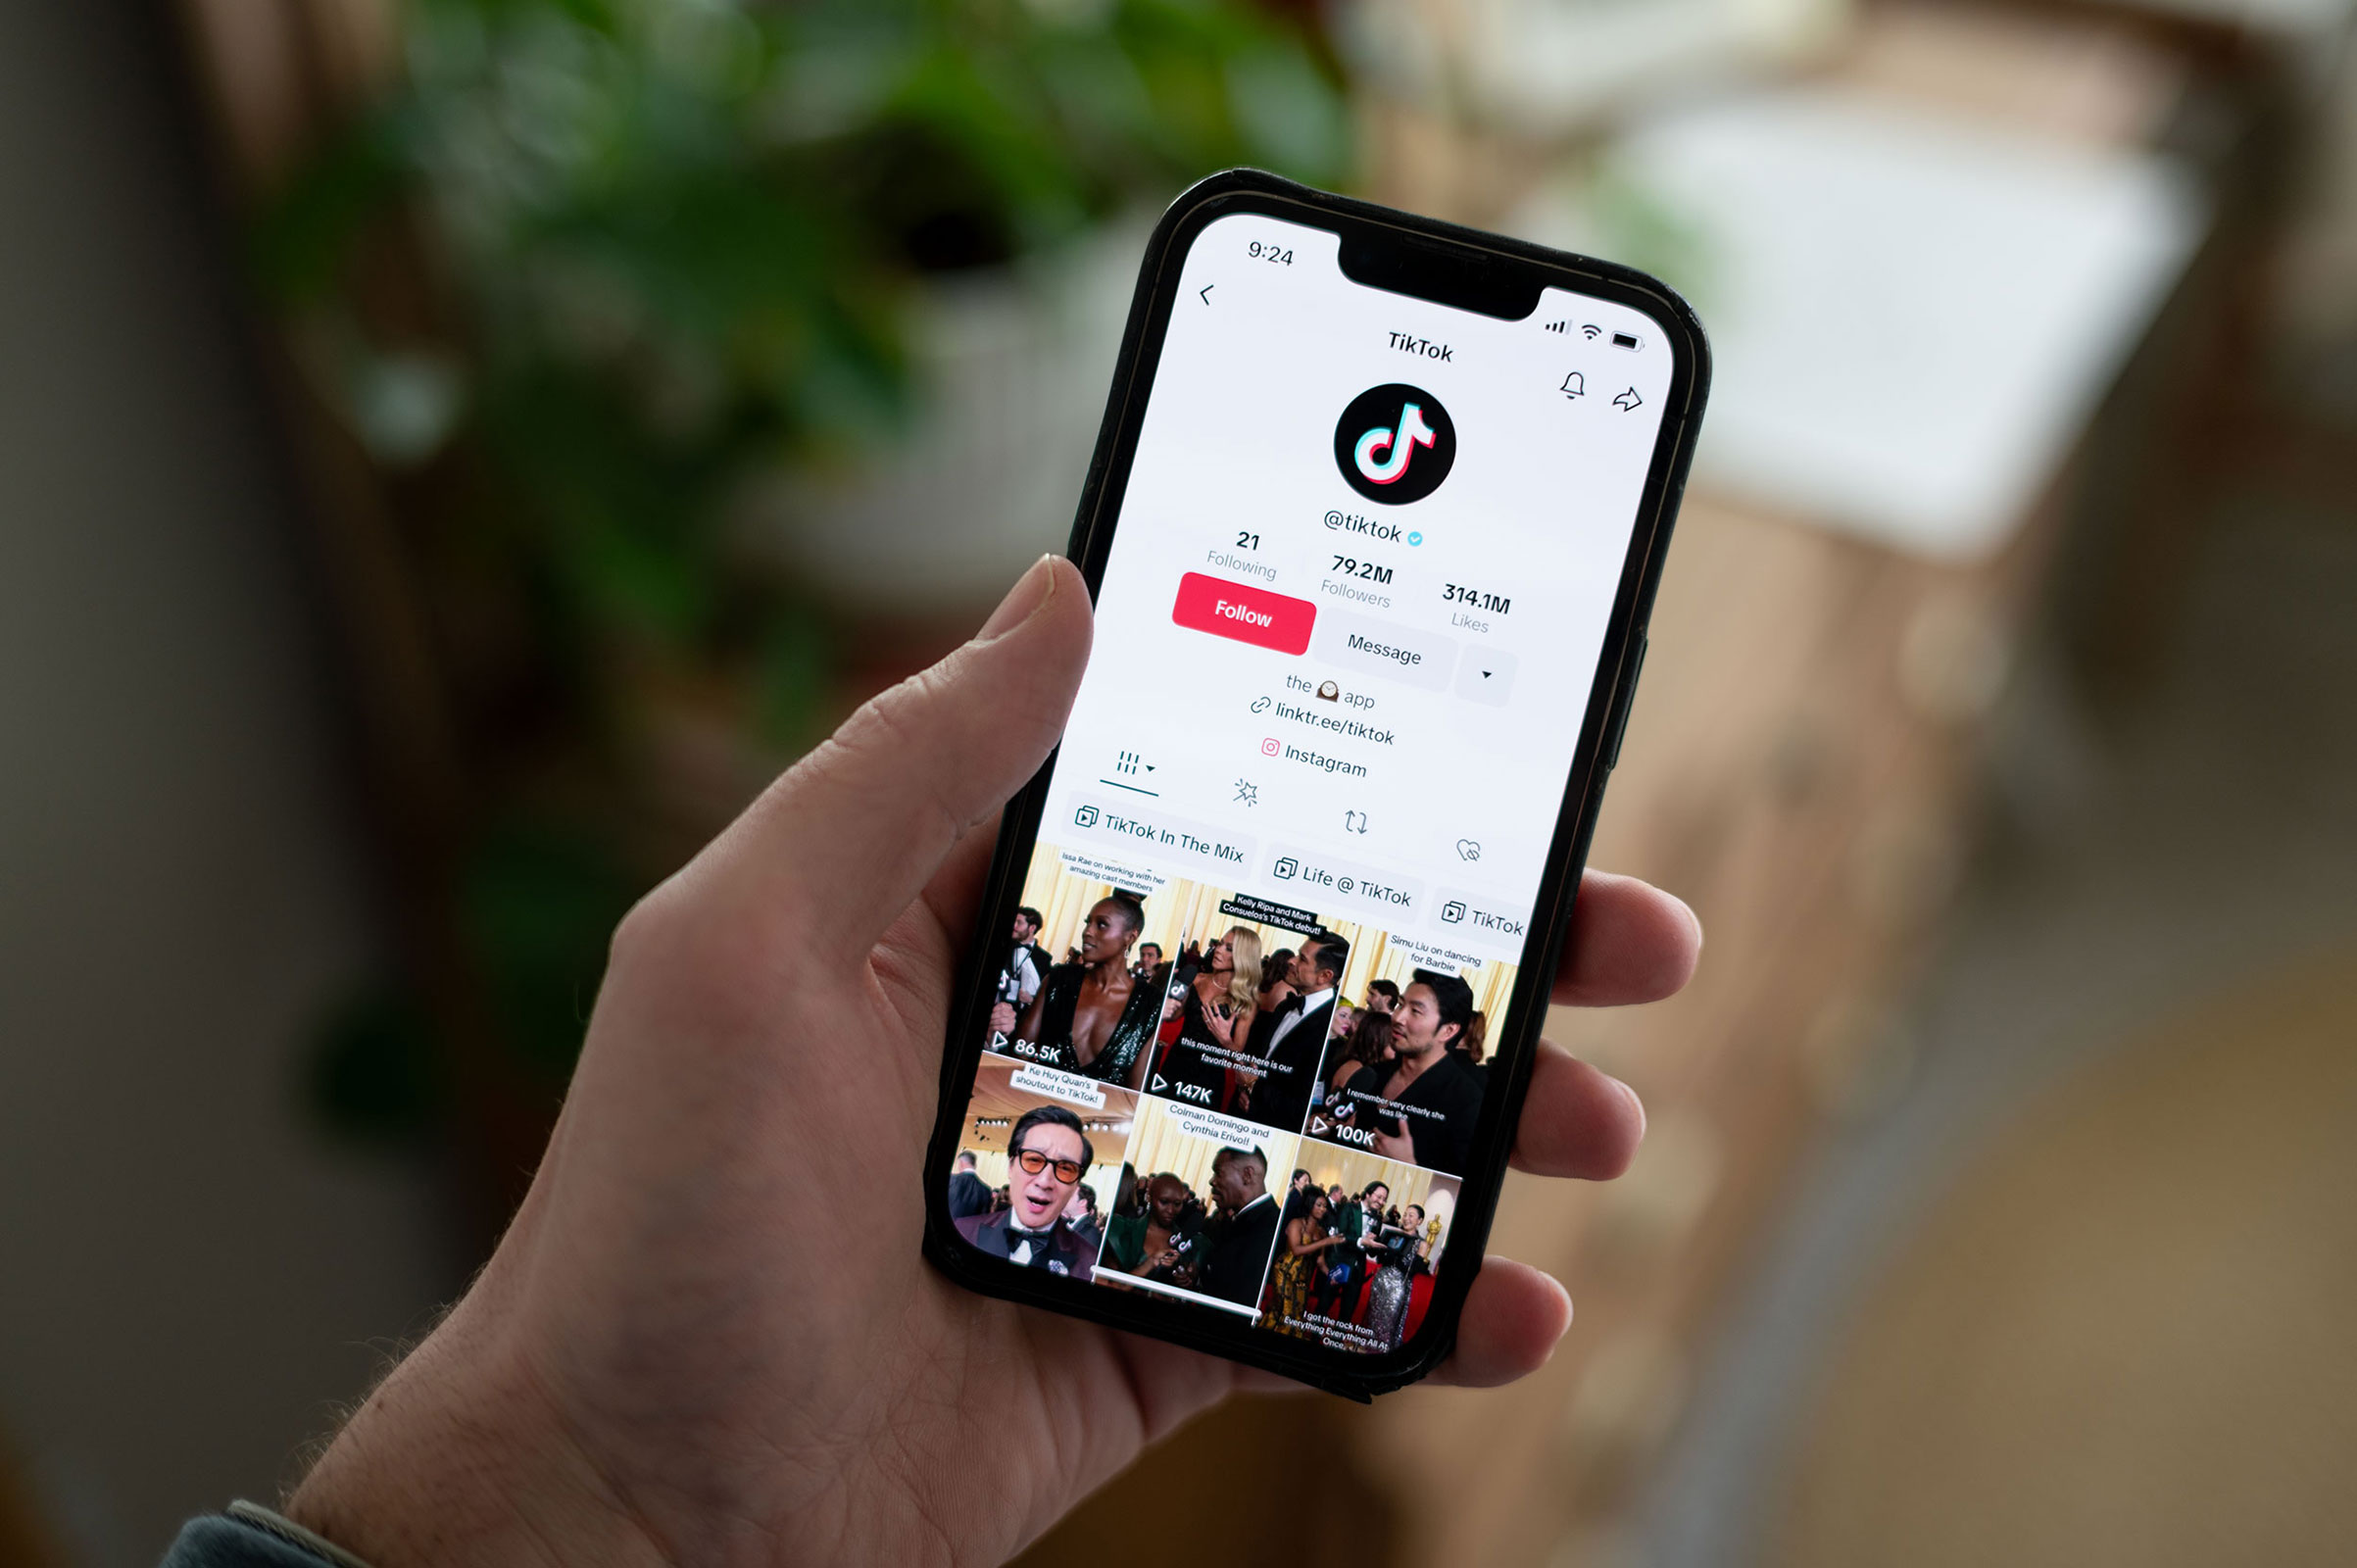 The US House of Representatives voted on legislation that could ban TikTok on Wednesday, a major challenge to one of the world’s most popular social media apps used by 170 million Americans, unless it part ways with its Chinese parent company, ByteDance.